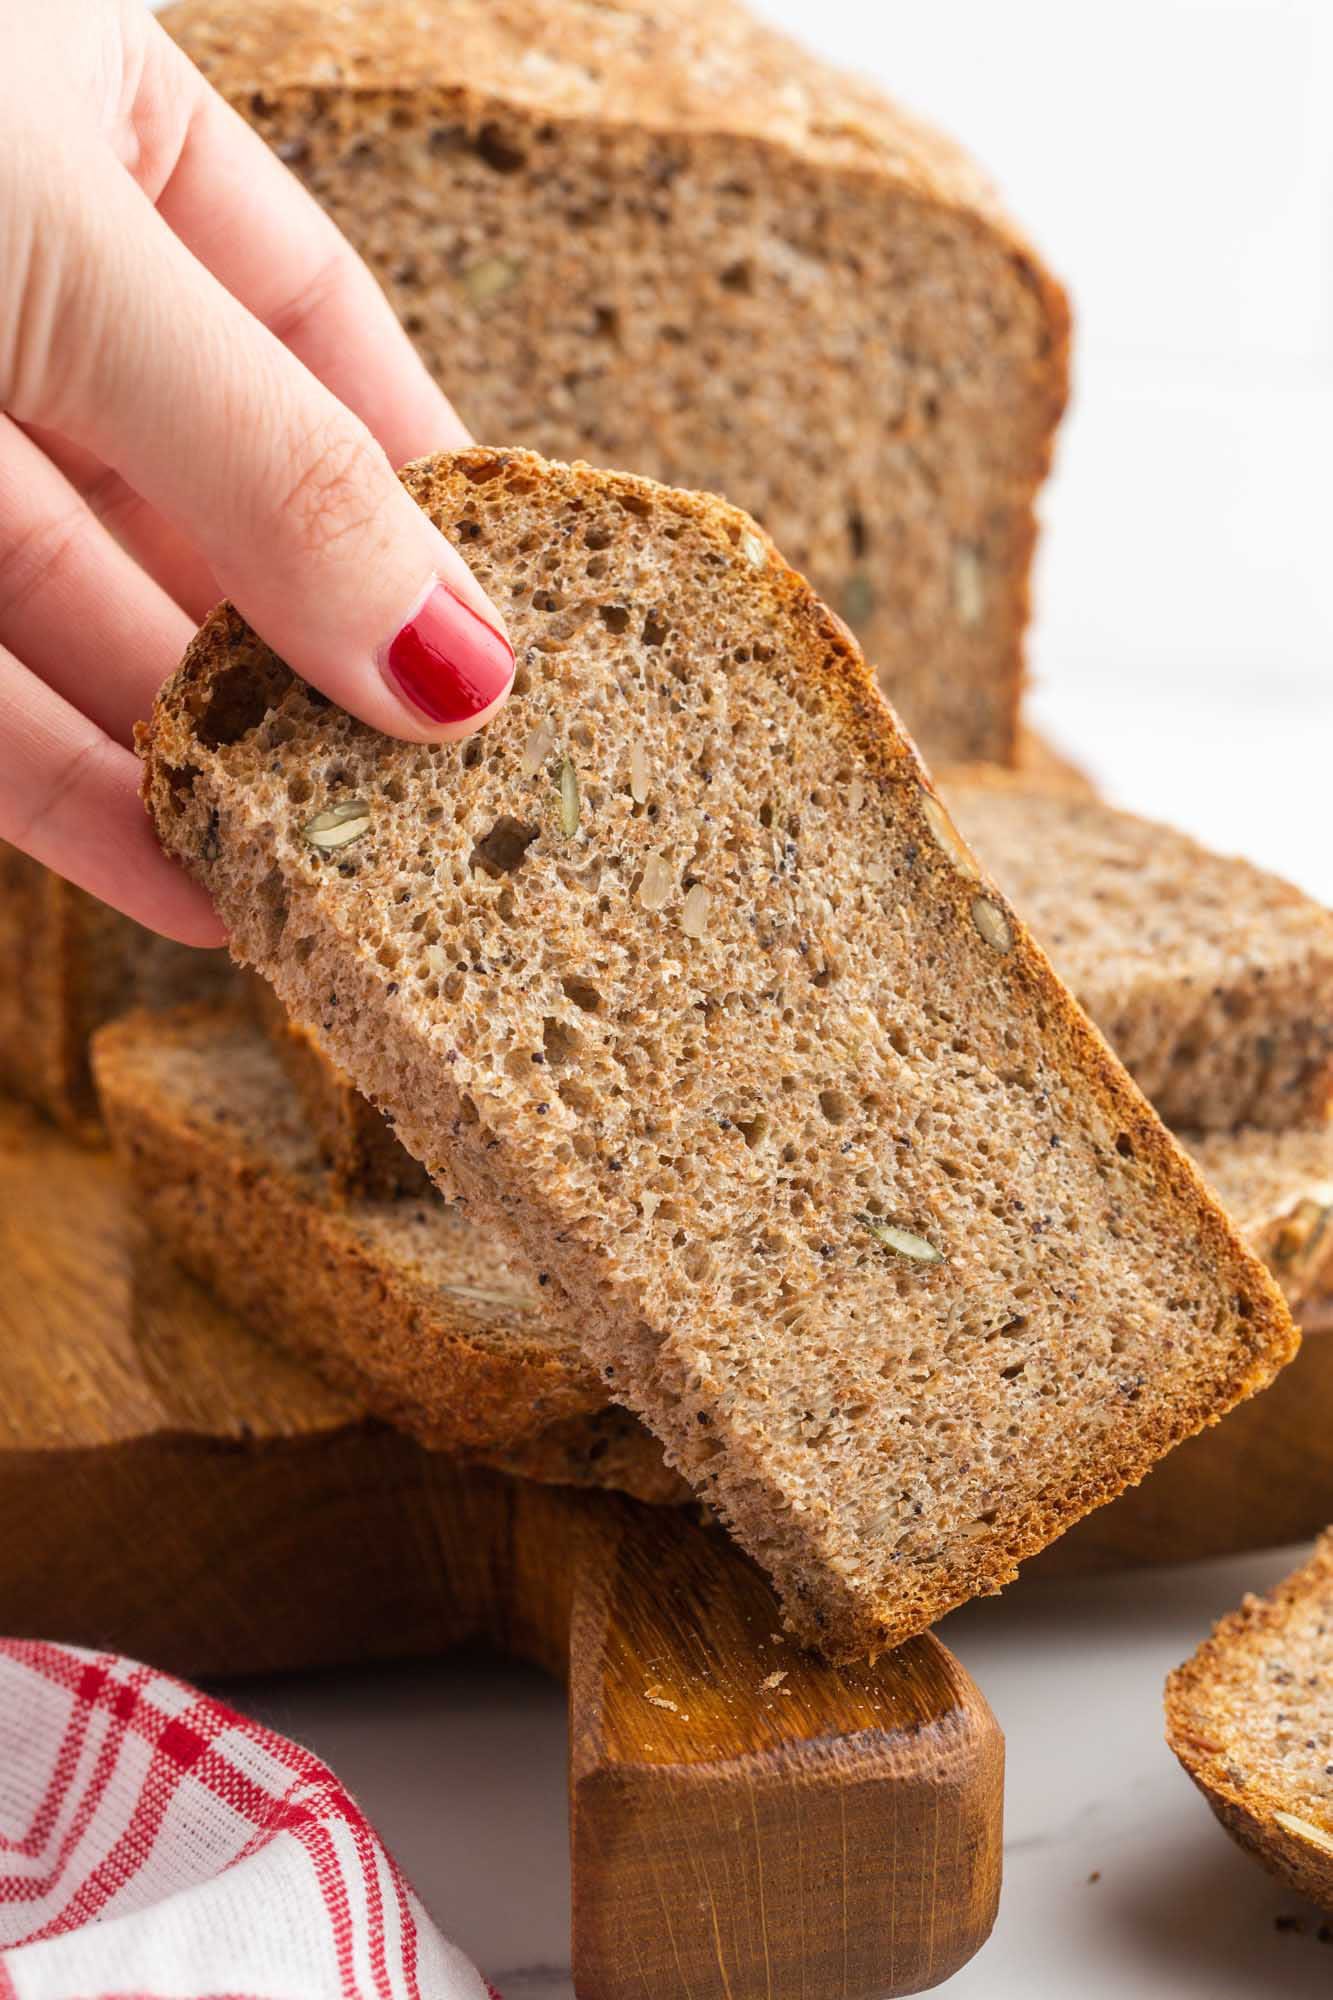 Holding a piece of seed bread